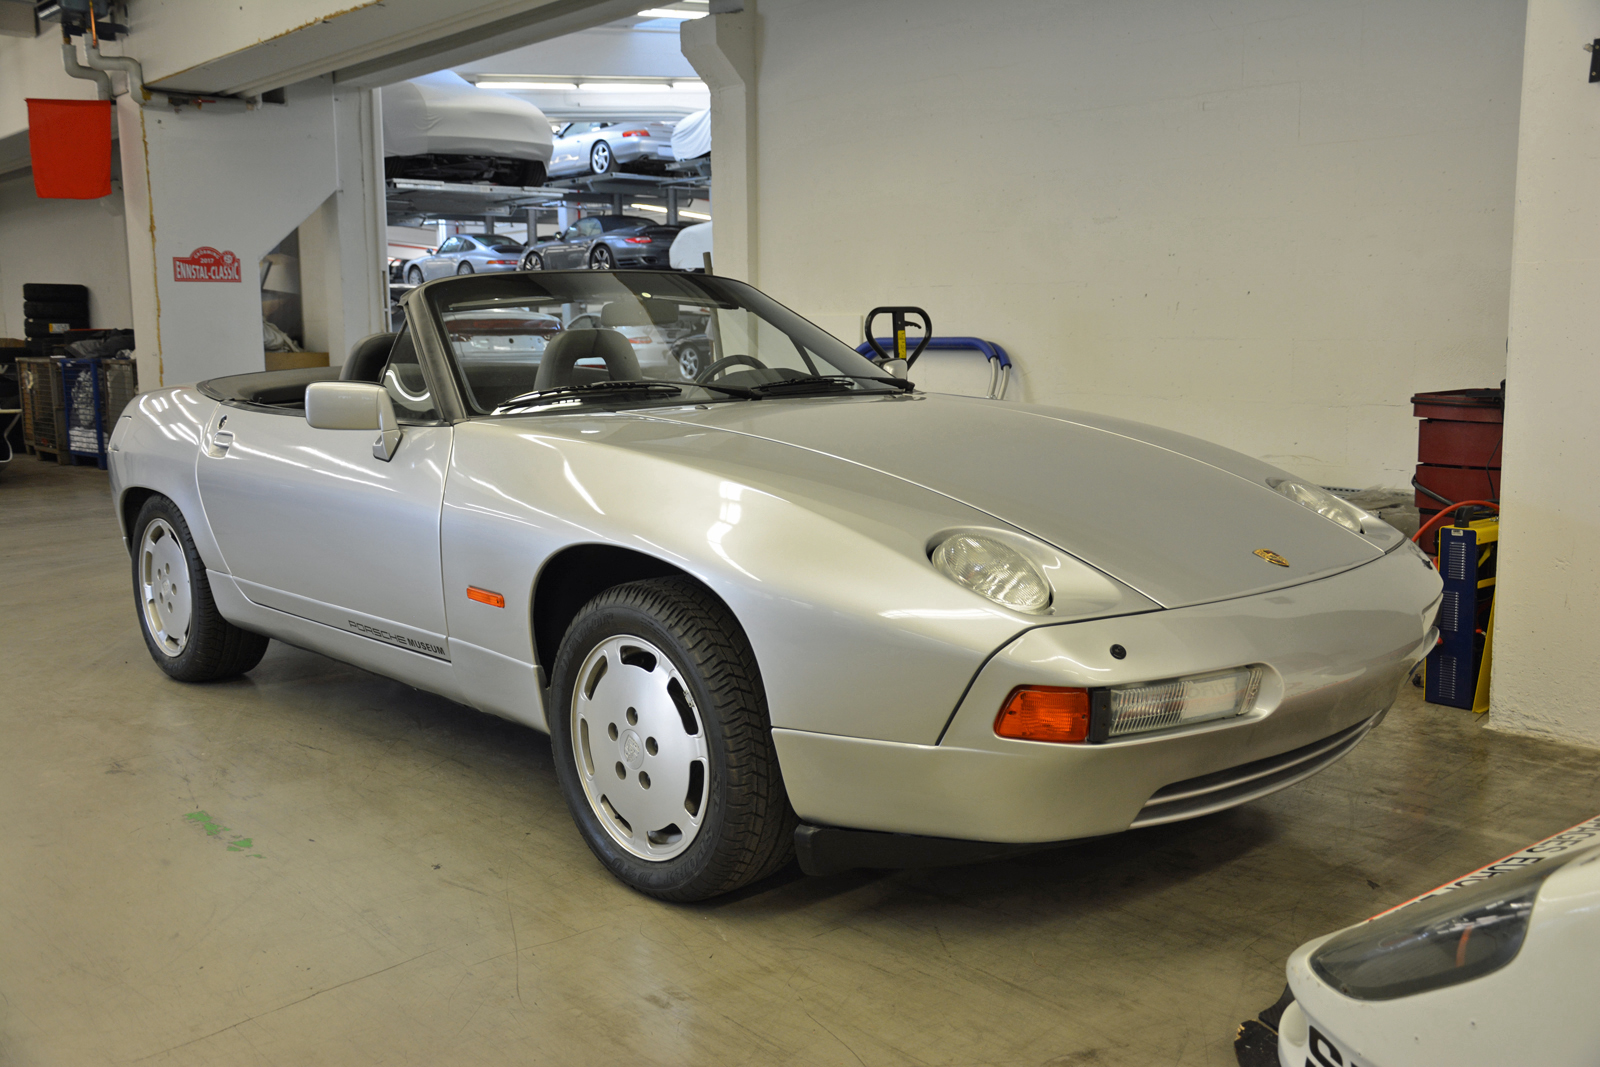 <p>Had things gone as planned, the 928 would have succeeded the 911 as the flagship of the Porsche family. The company’s research and development department built an experimental 928 convertible in preparation for a possible production model to replace the <strong>topless 911</strong>. Upper management mothballed the project in <strong>late 1988</strong> to save money.</p>